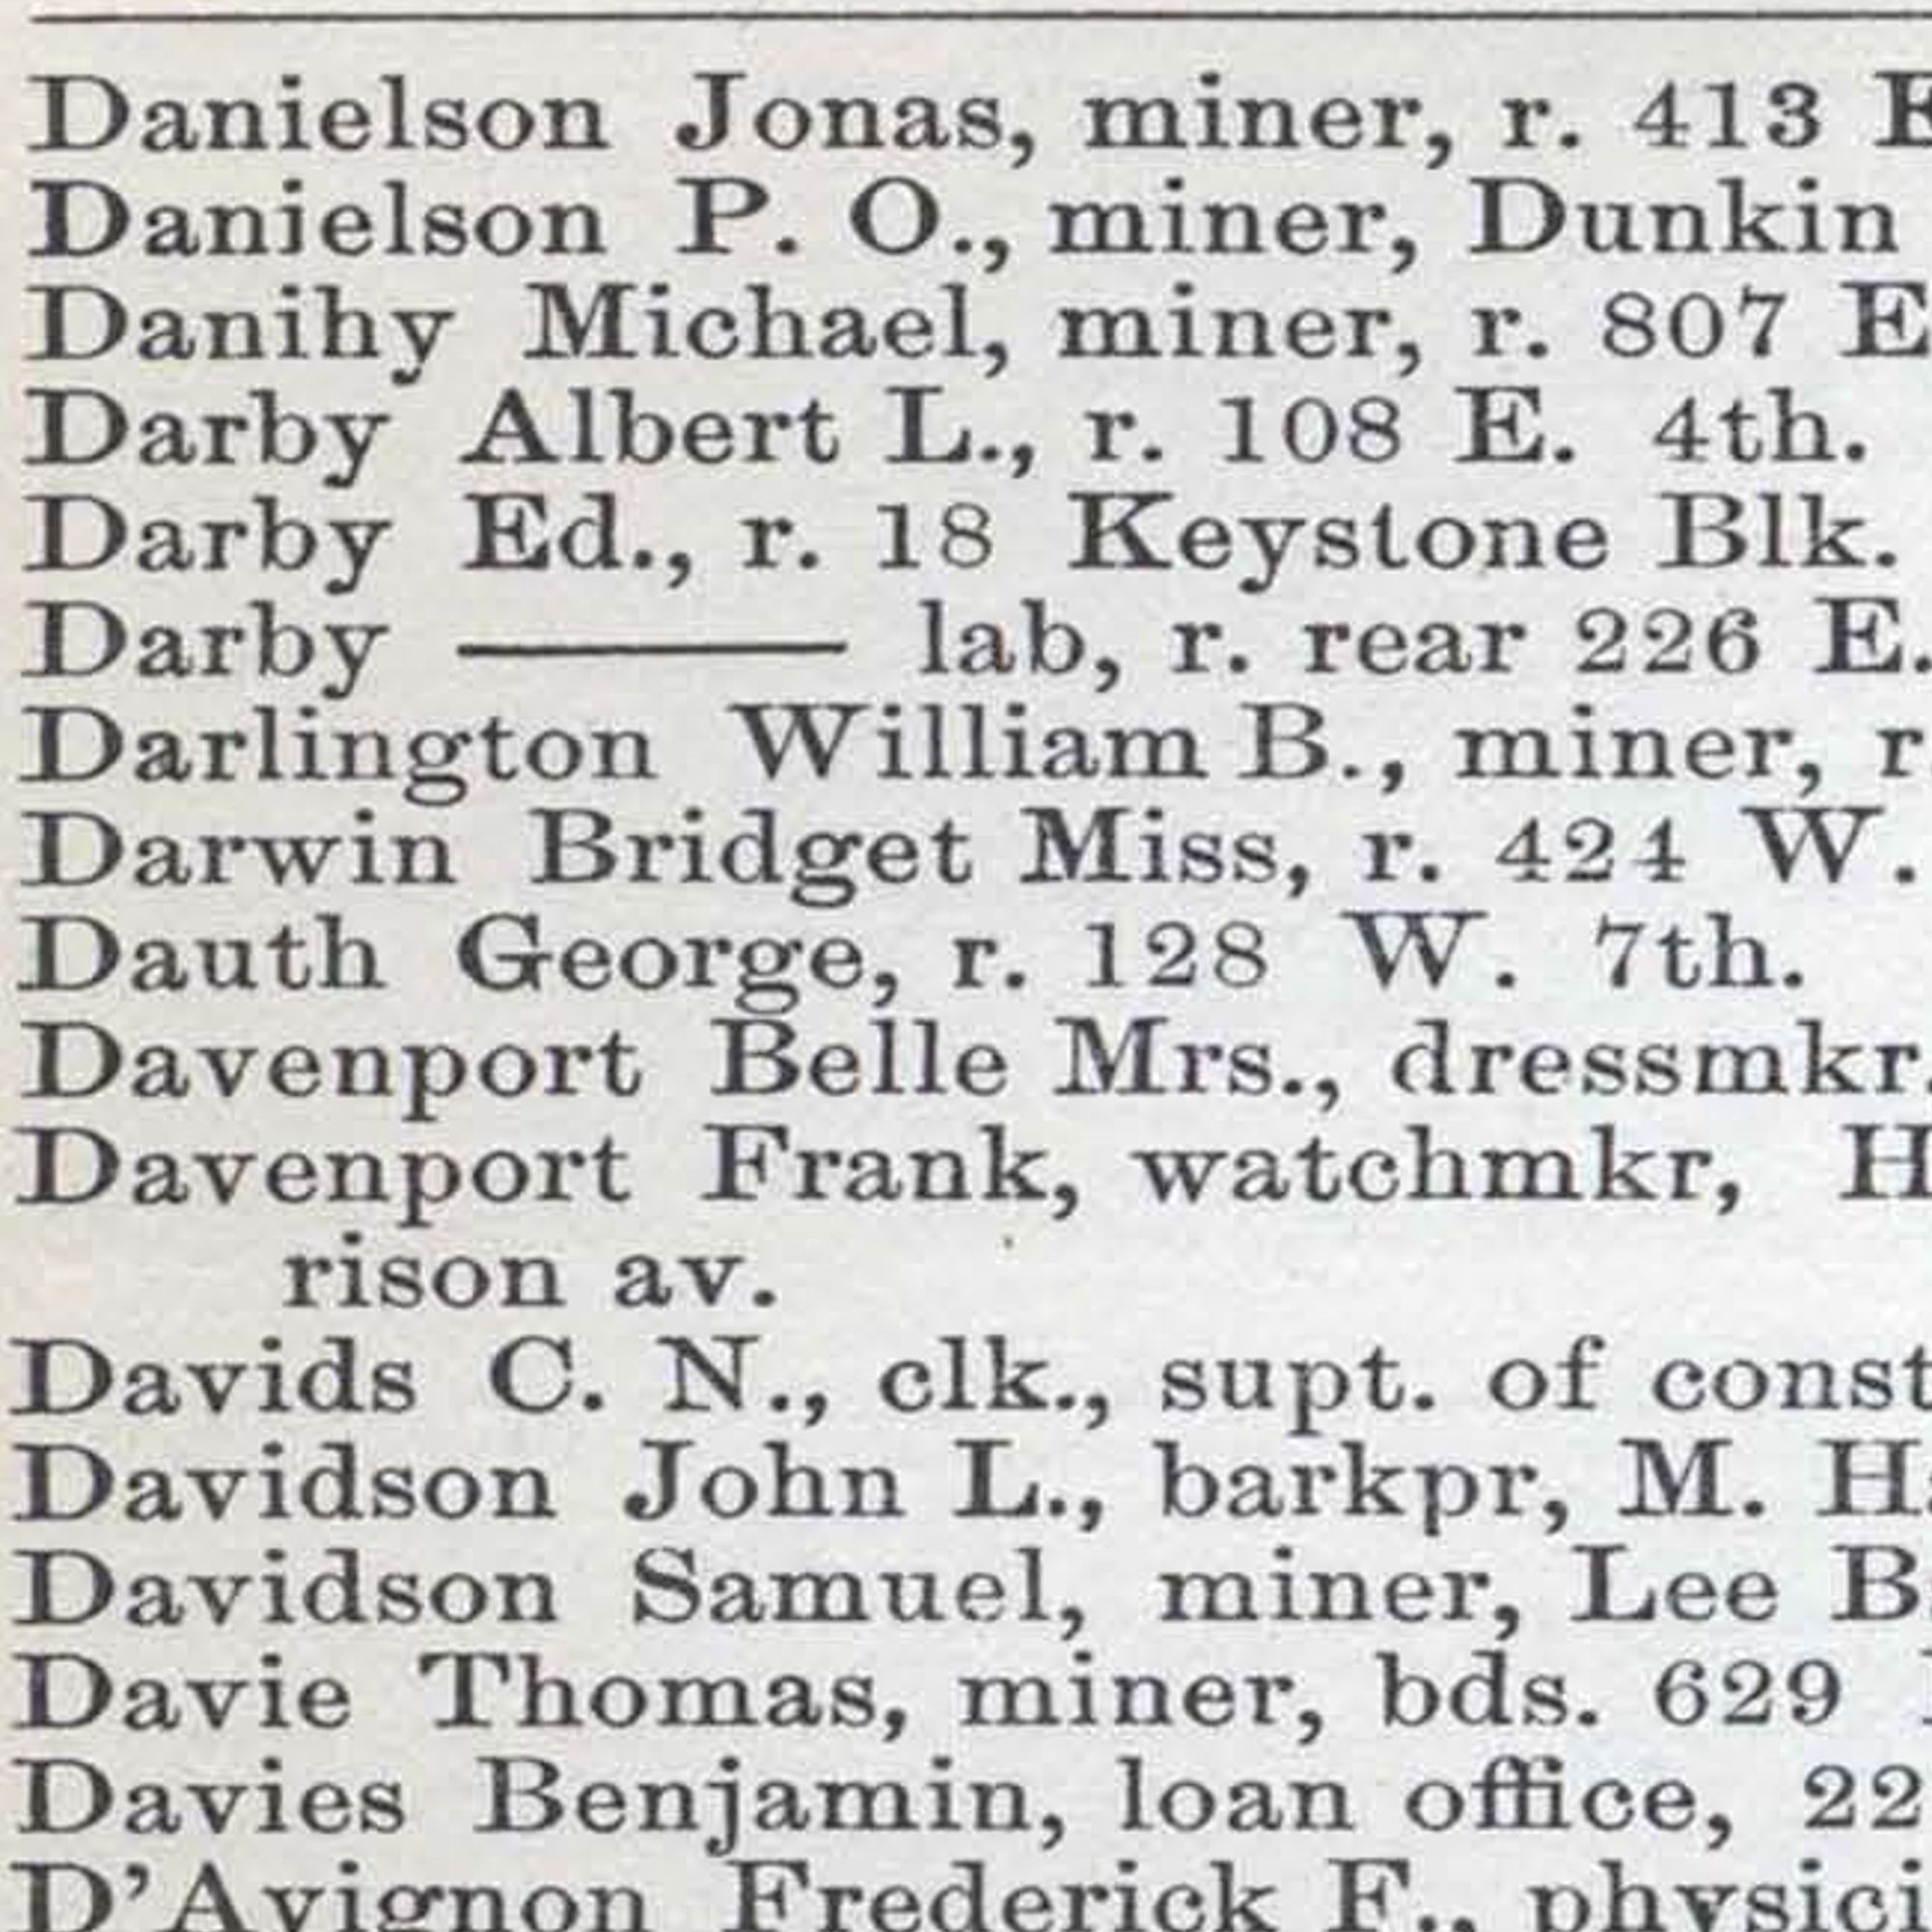 Dauth Family Archive - 1888 - Leadville Directory - Entry for George Dauth